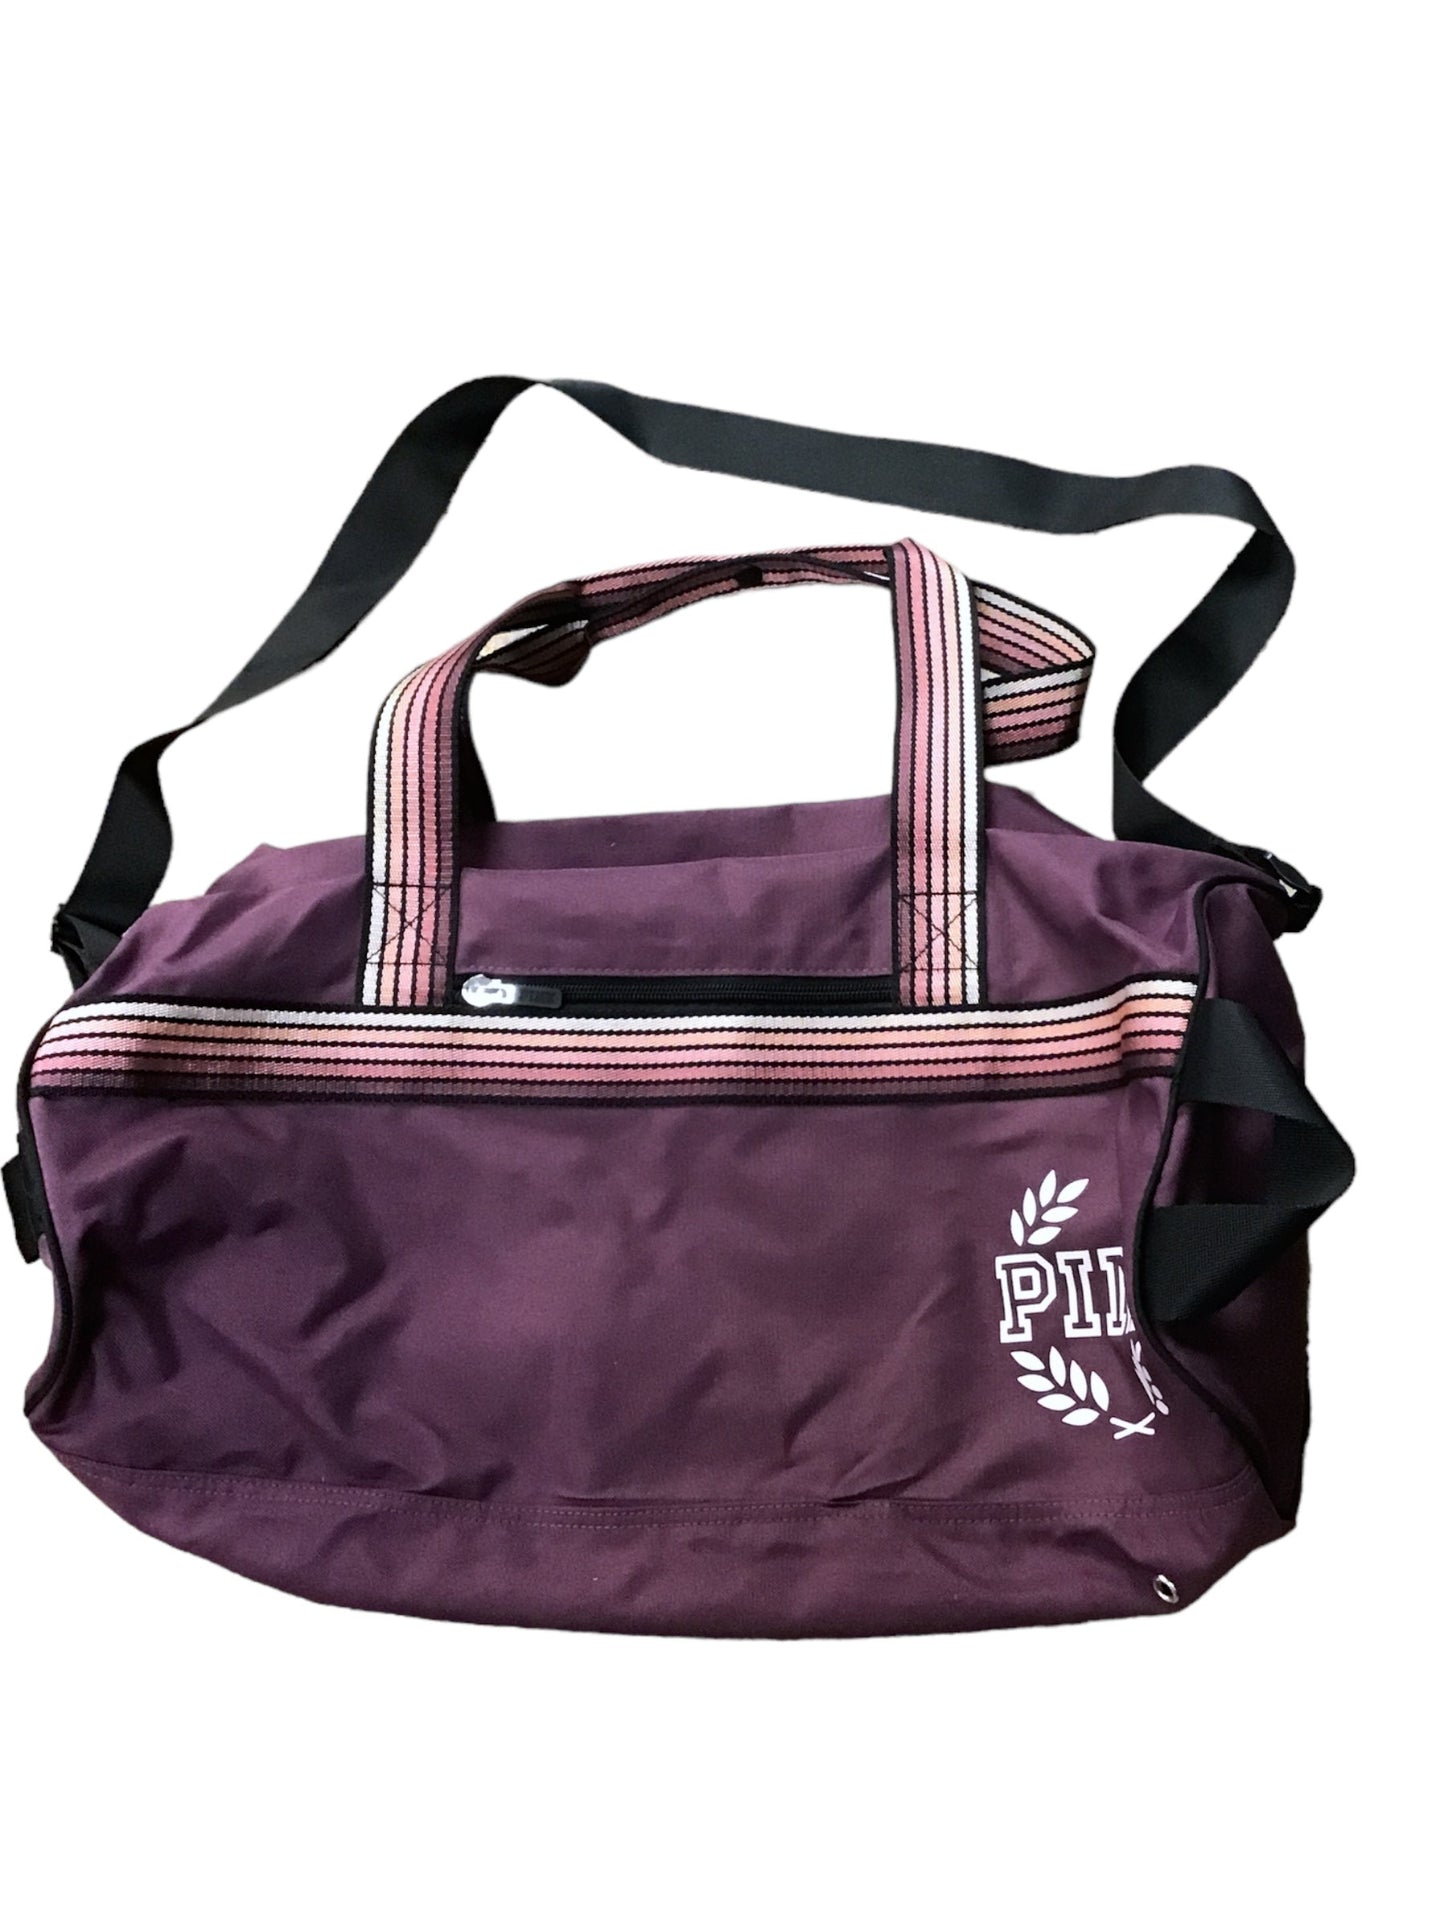 Duffle And Weekender Pink, Size Large